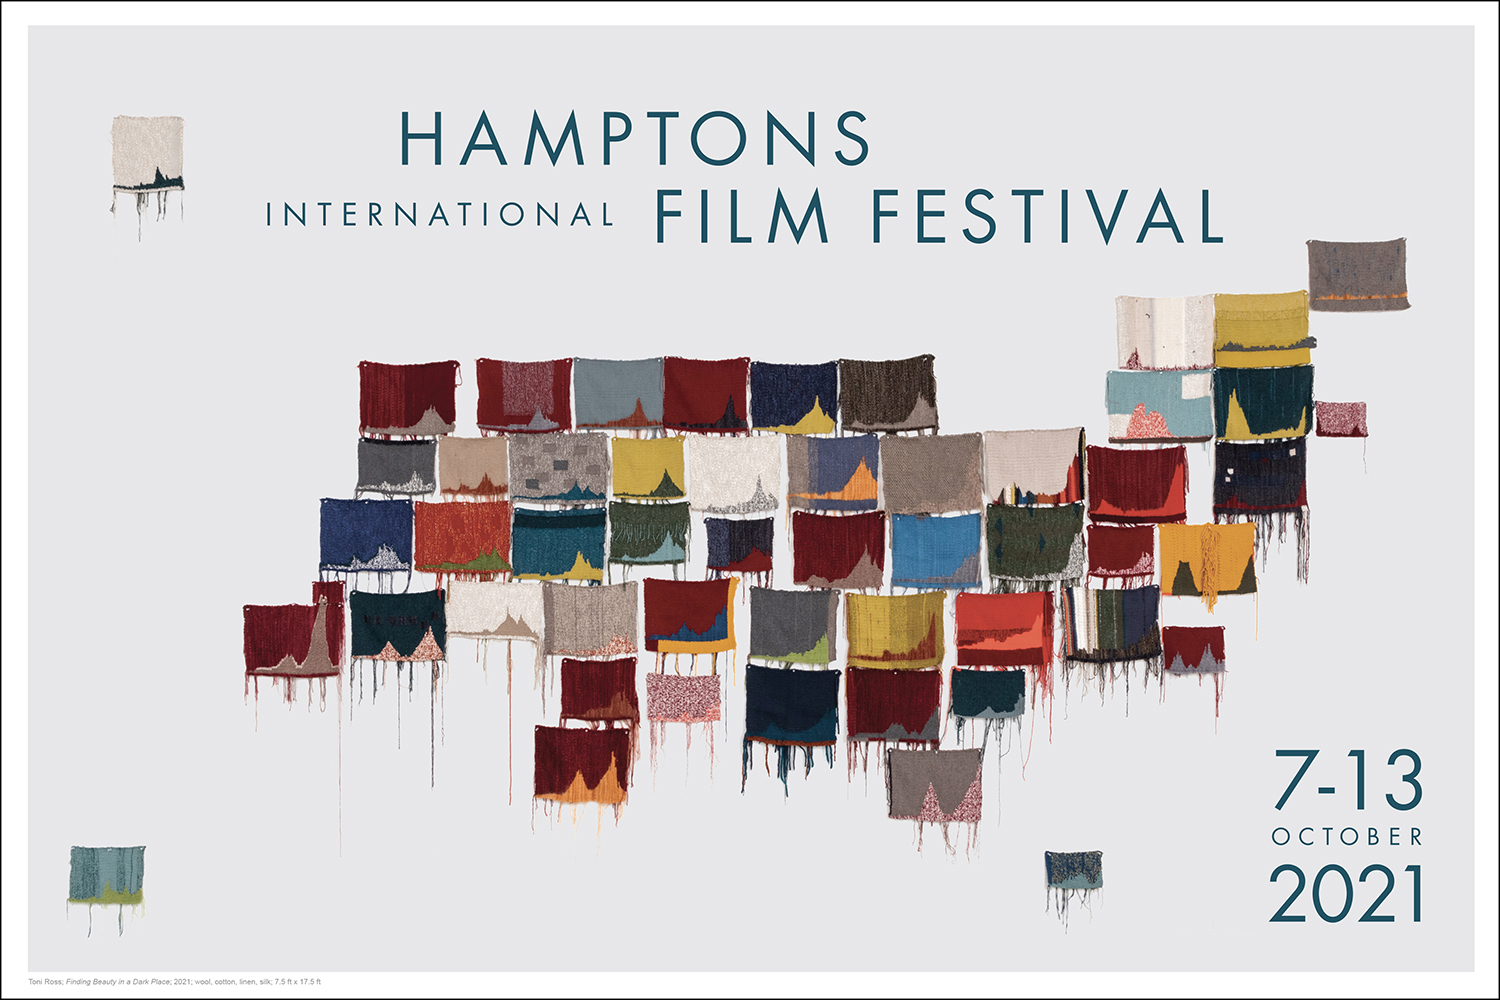 The 2021 Hamptons Film Festival poster featuring "Find beauty in a dark place" by Toni Ross